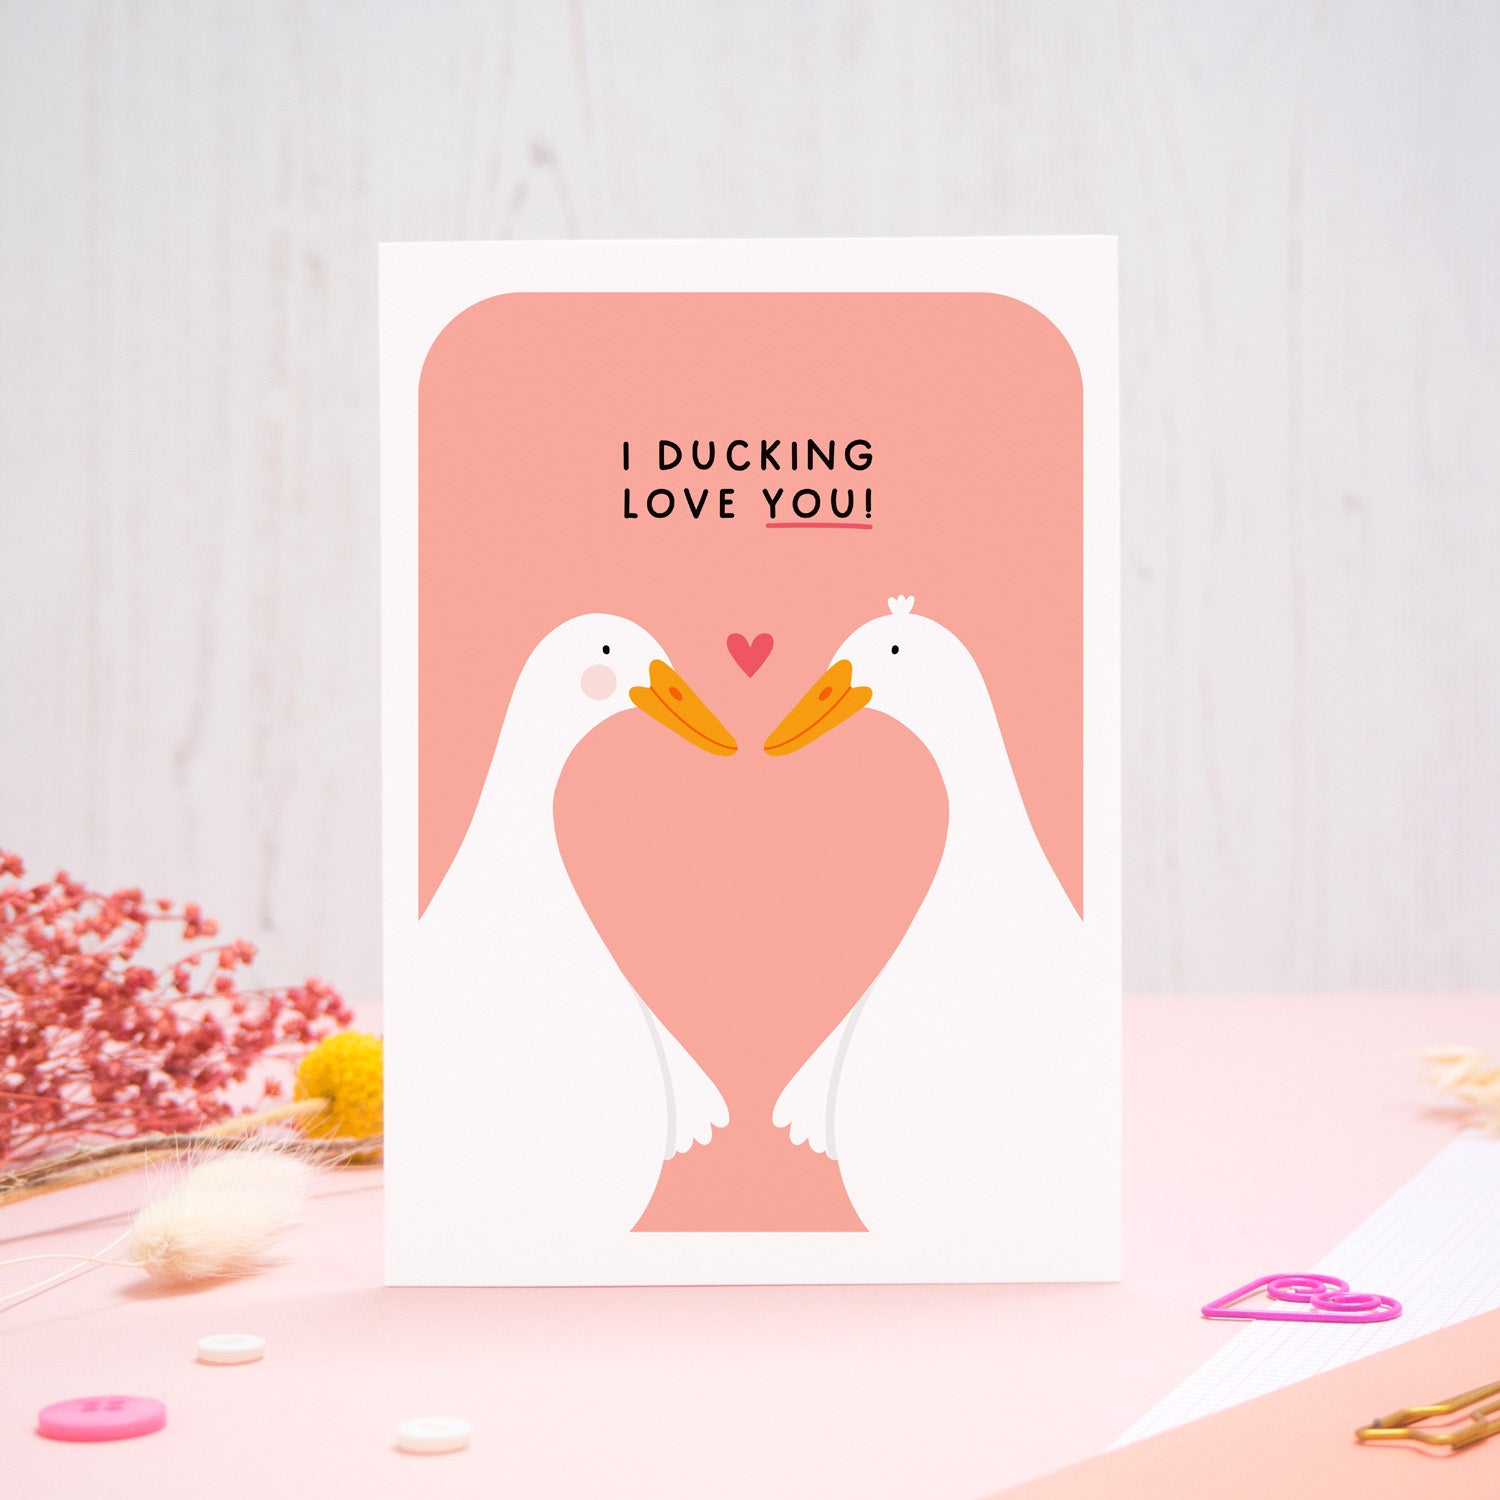 A Valentine’s pun card featuring two cute white ducks holding wings with the text ‘I Ducking Love You’, photographed stood on a pink and white background with floral props, paper clips, and buttons. 